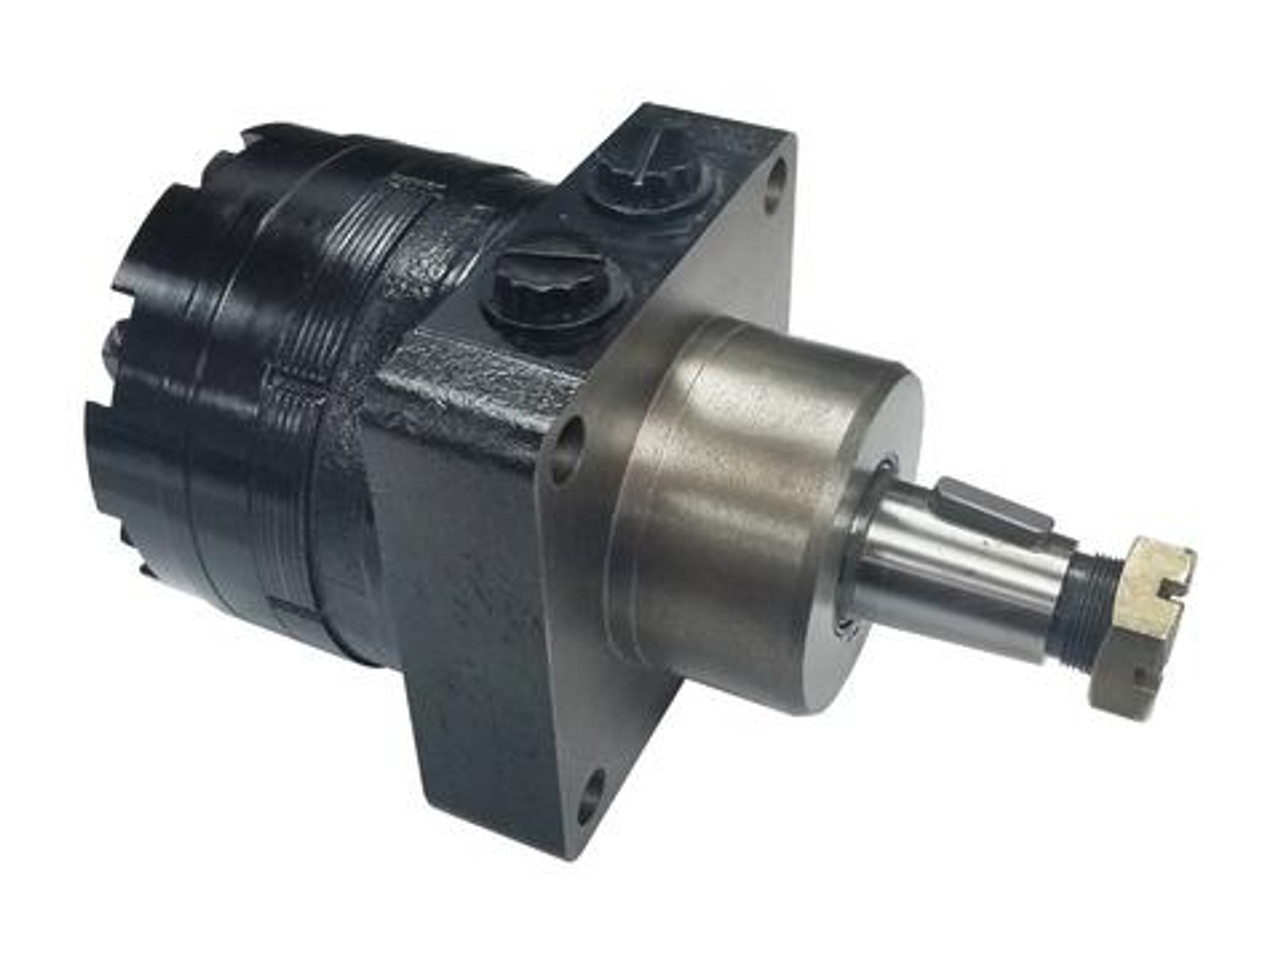 BMER-2-250-WS-G2-S-R Hydraulic motor low speed high torque 15.68 cubic inch displacement  Dynamic Fluid Components